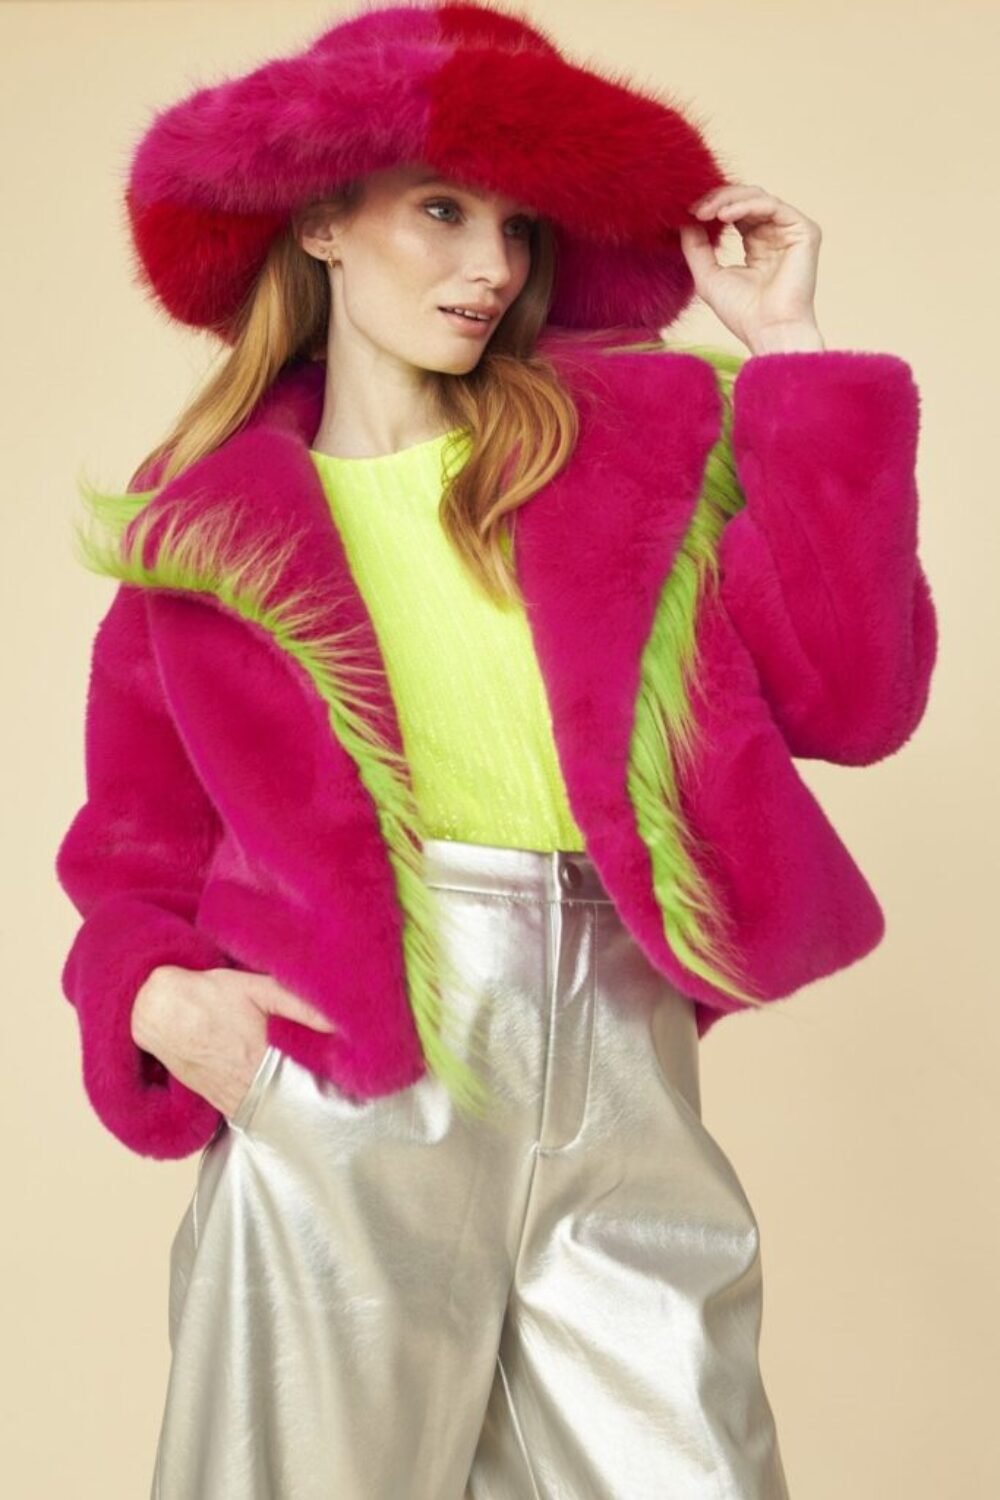 Shop Lux Cropped Knitted Faux Fur Jacket and women's luxury and designer clothes at www.lux-apparel.co.uk